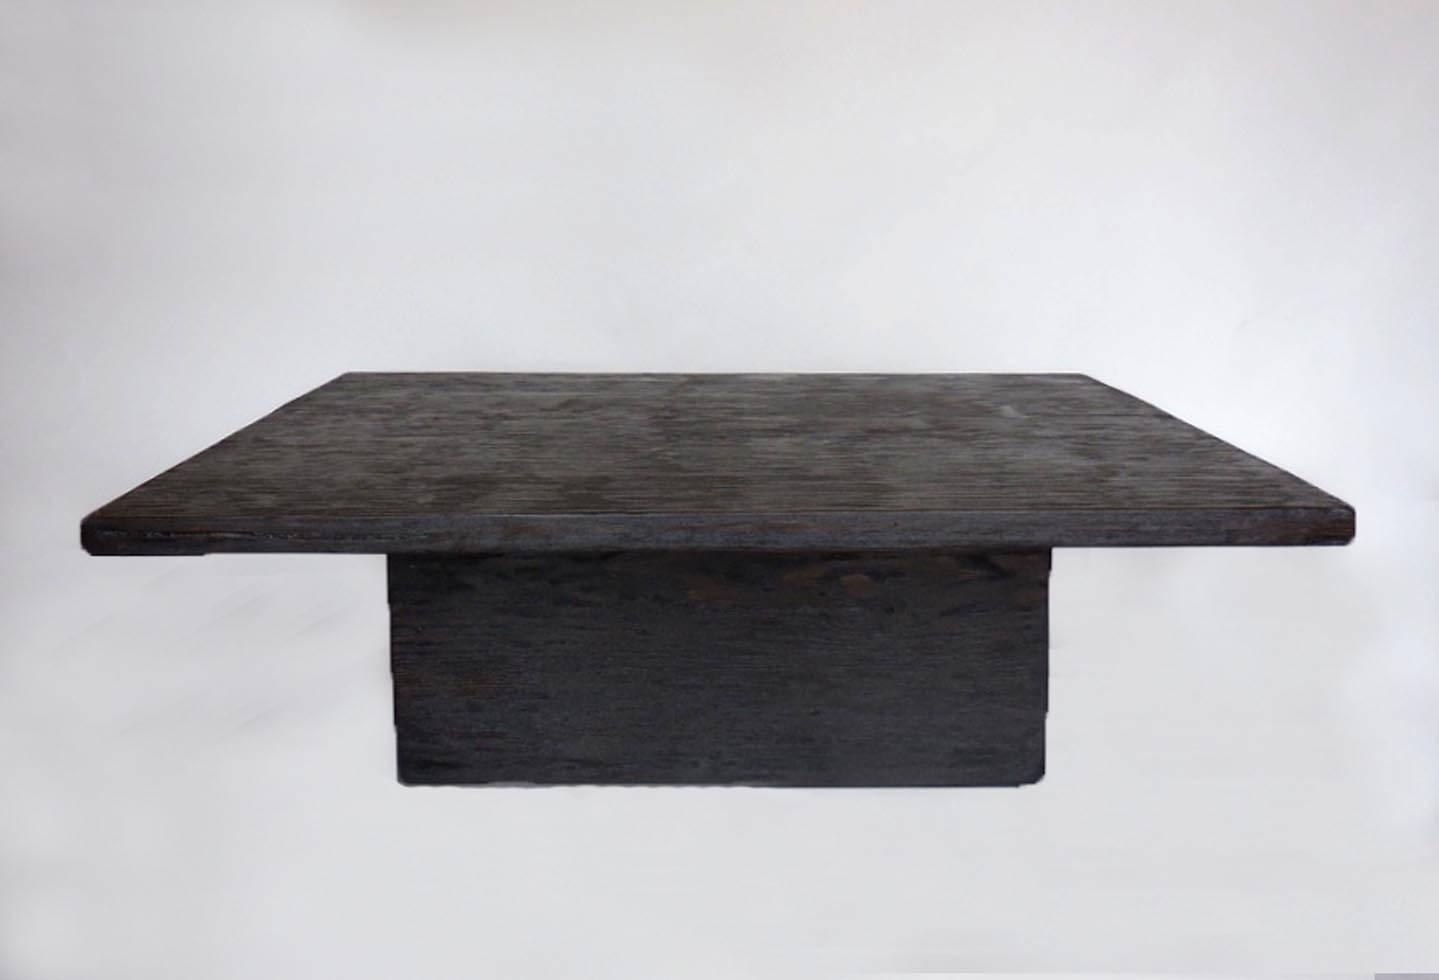 Reclaimed douglas fir wood coffee table with espresso finish. Can be made in any size and in a variety of finishes.
Made in Los Angeles, by Dos Gallos Studio.
PRICES ARE SUBJECT TO CHANGE. PLEASE INQUIRE BEFORE PLACING AN ORDER. CUSTOM ORDERS ARE